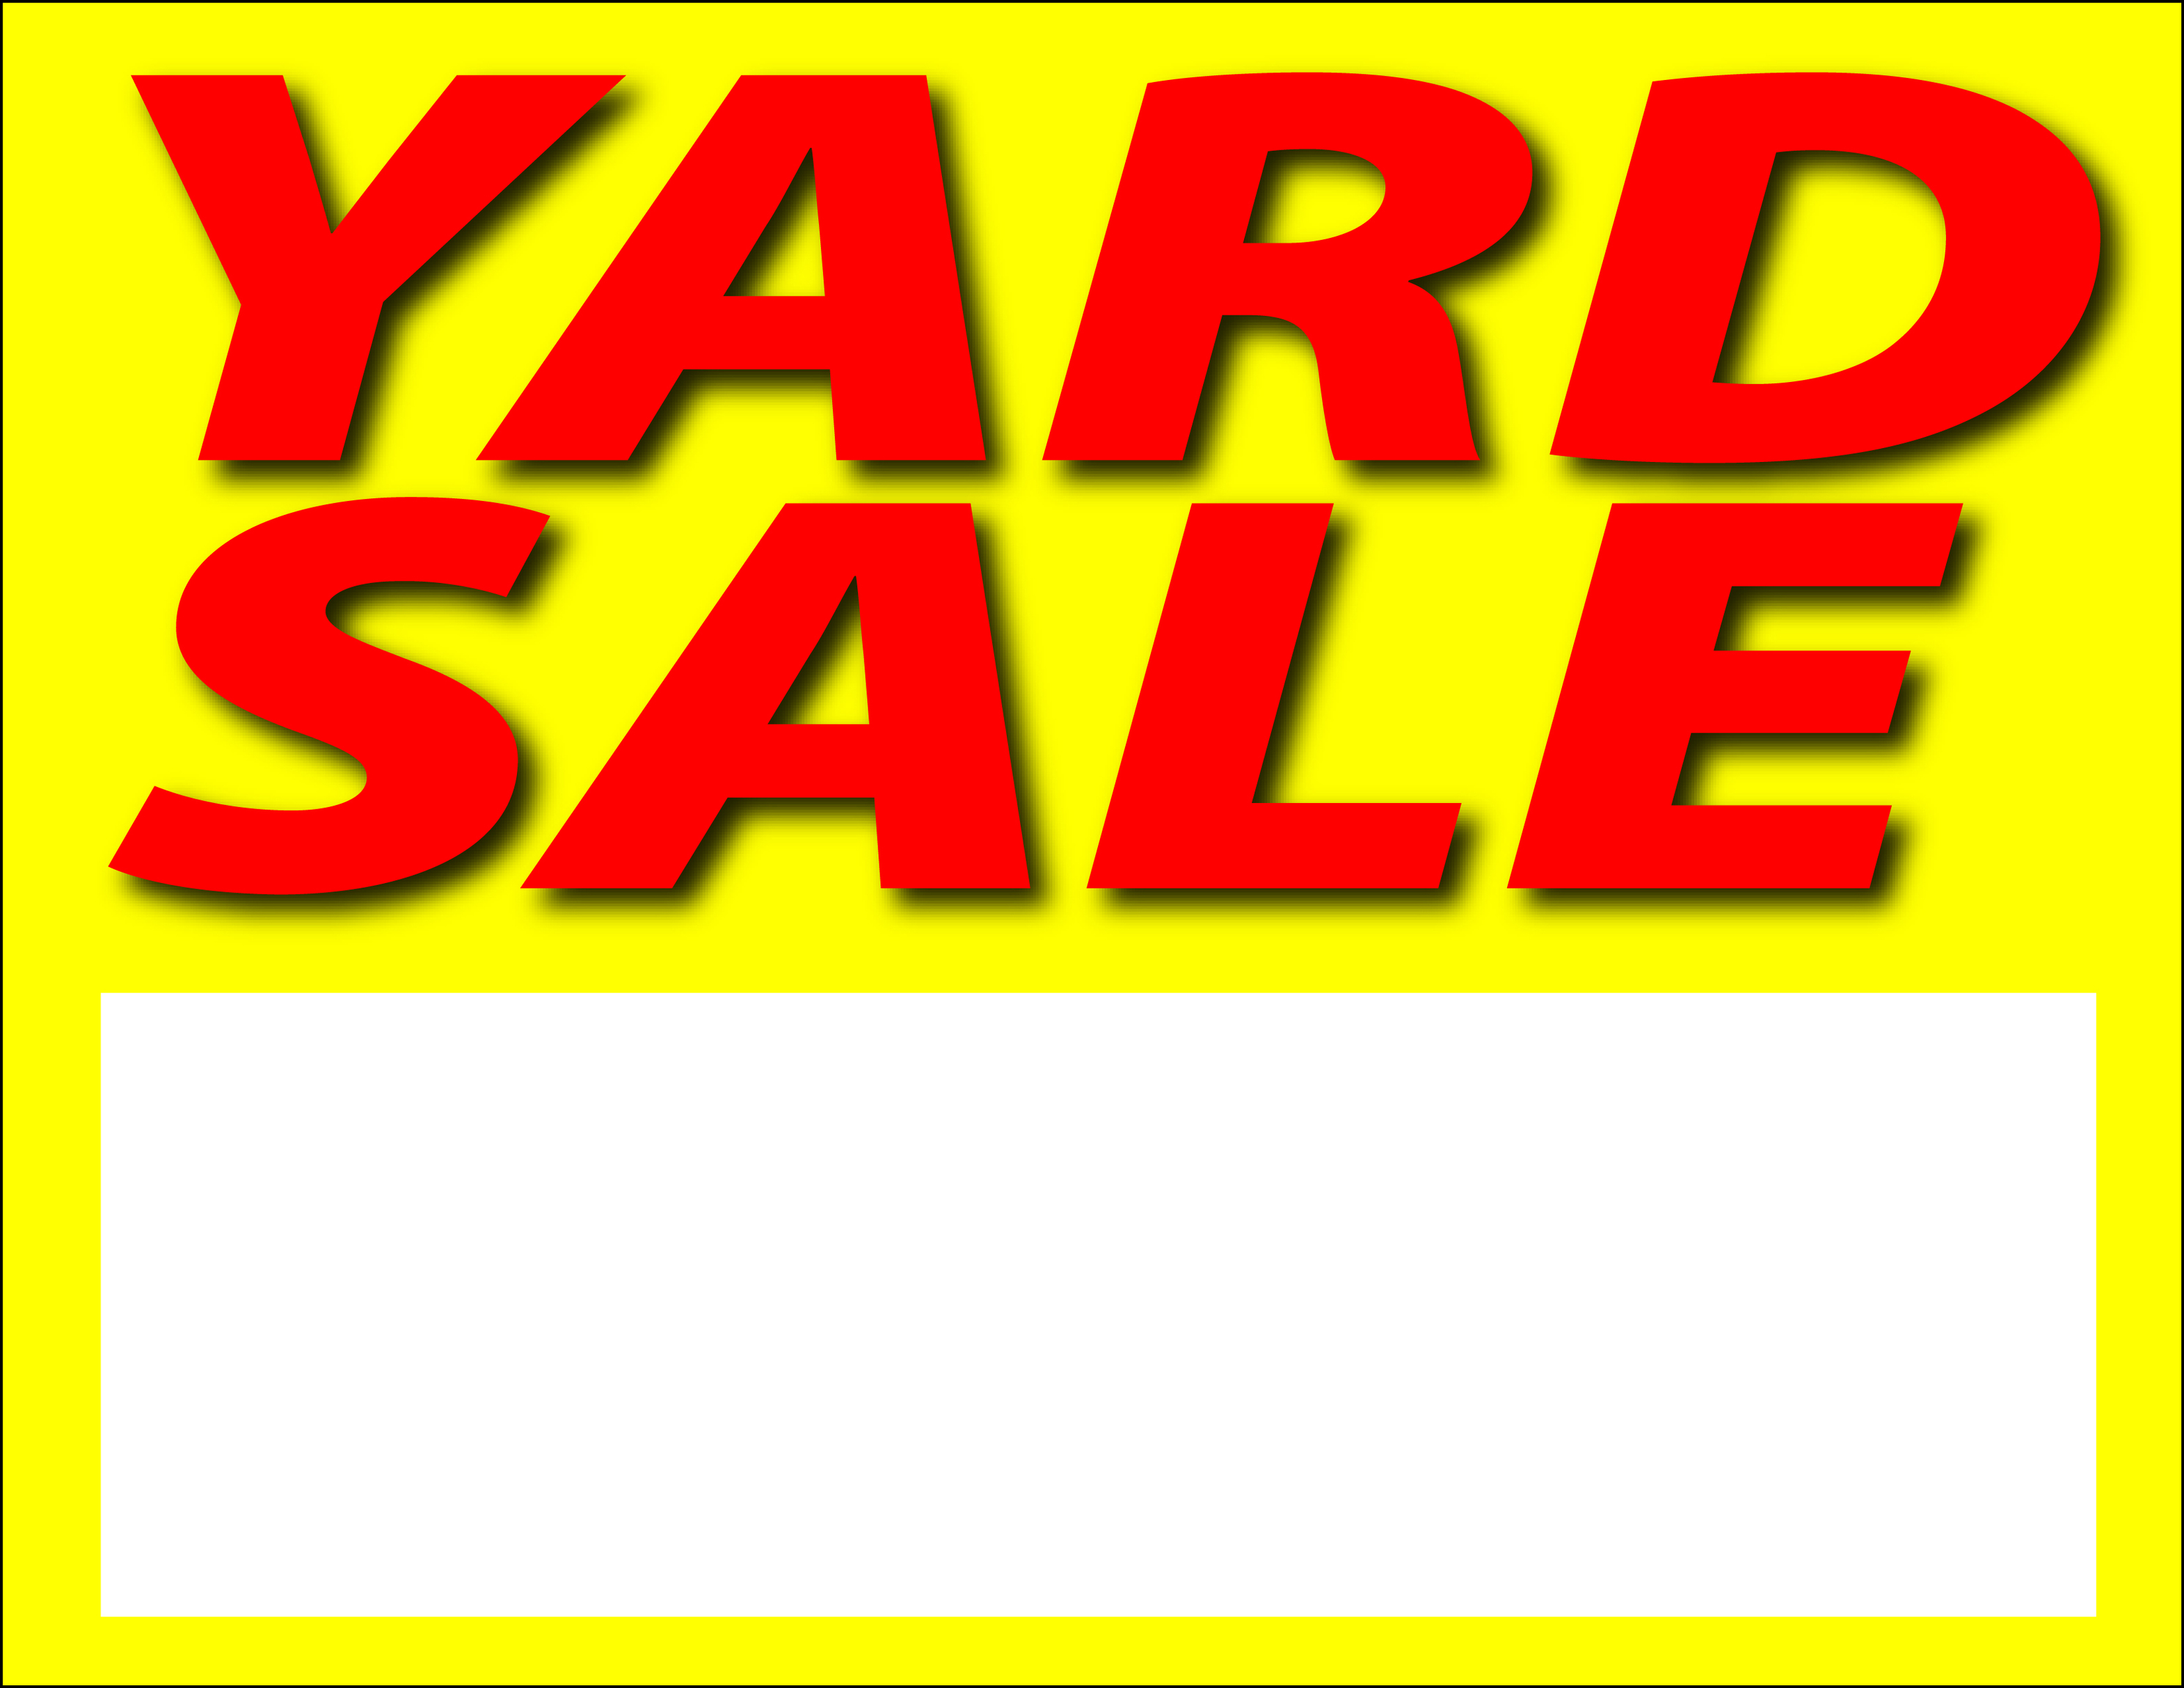 Images for printable yard sale sign clipart free to use clip.